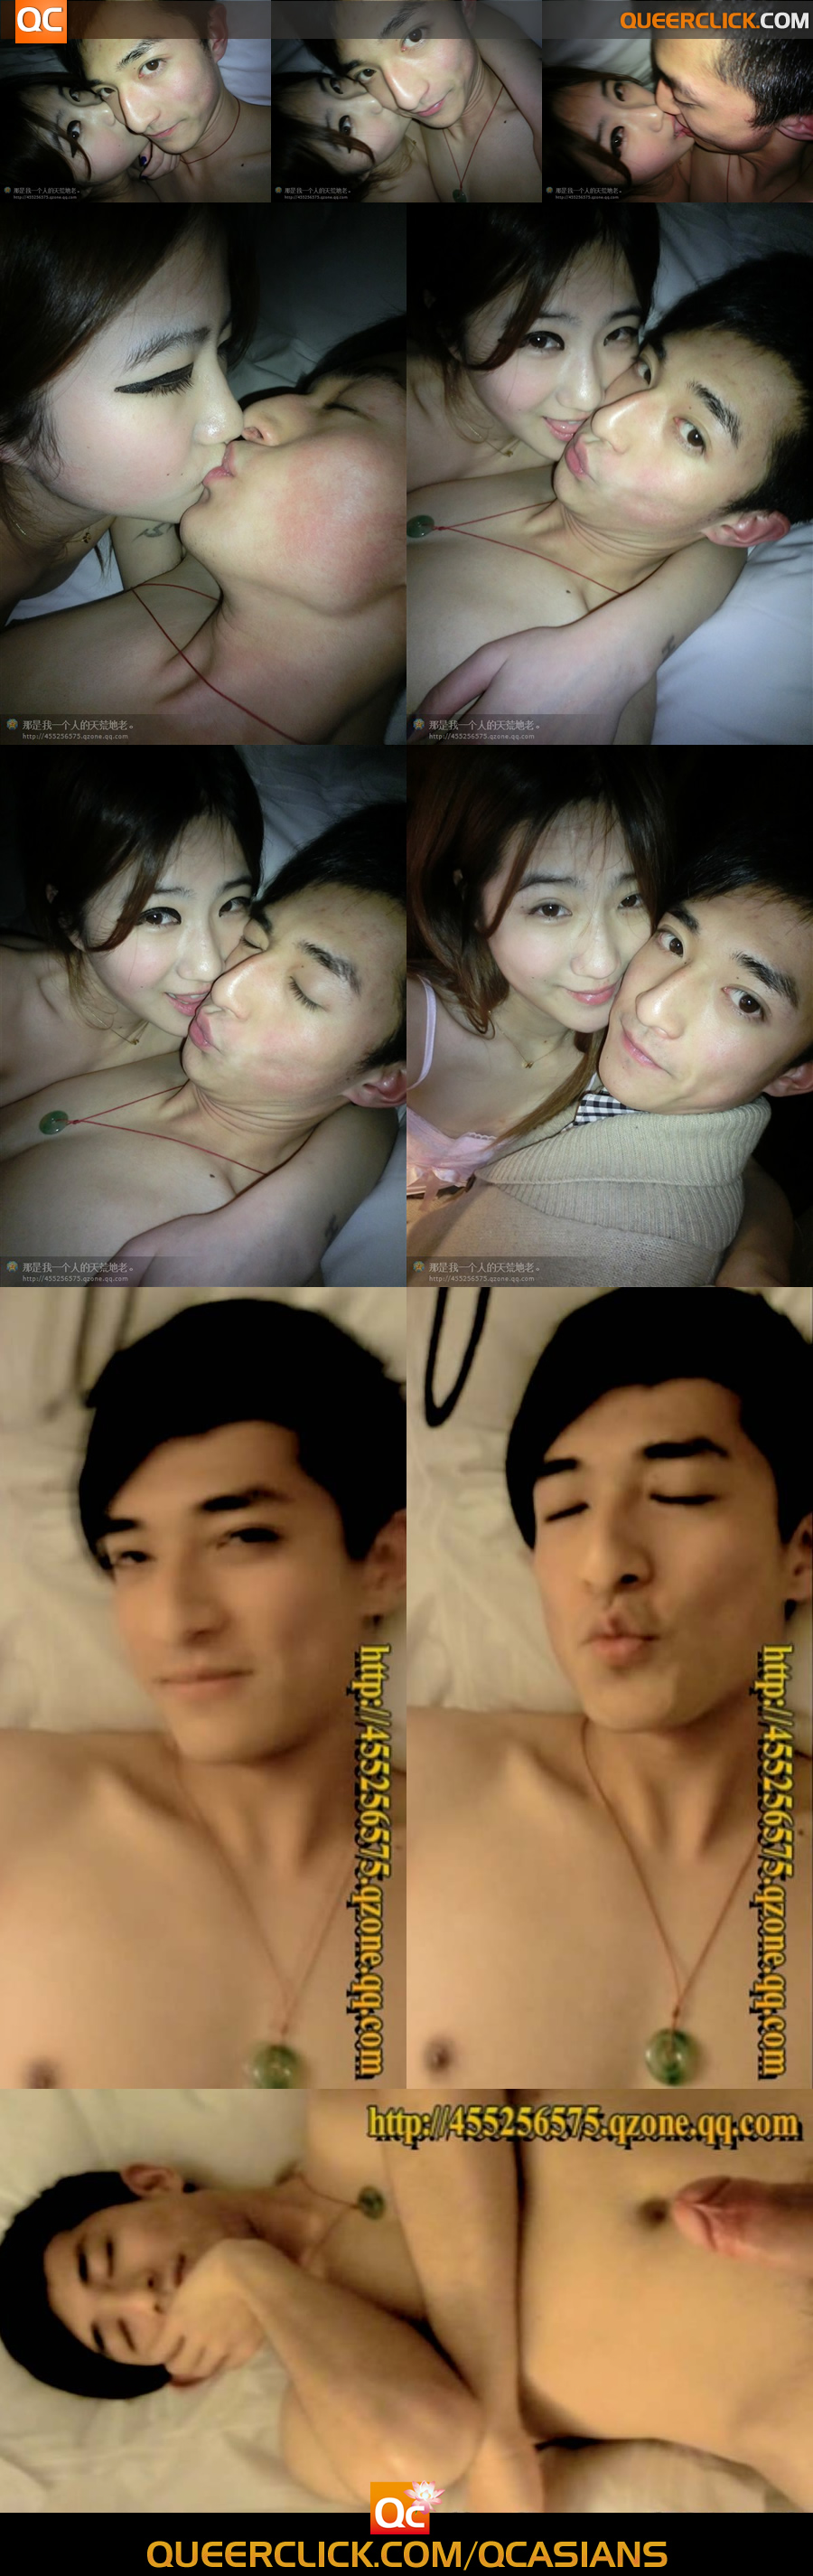 Video Straight Asian Couple Sex Tape Leaked picture pic